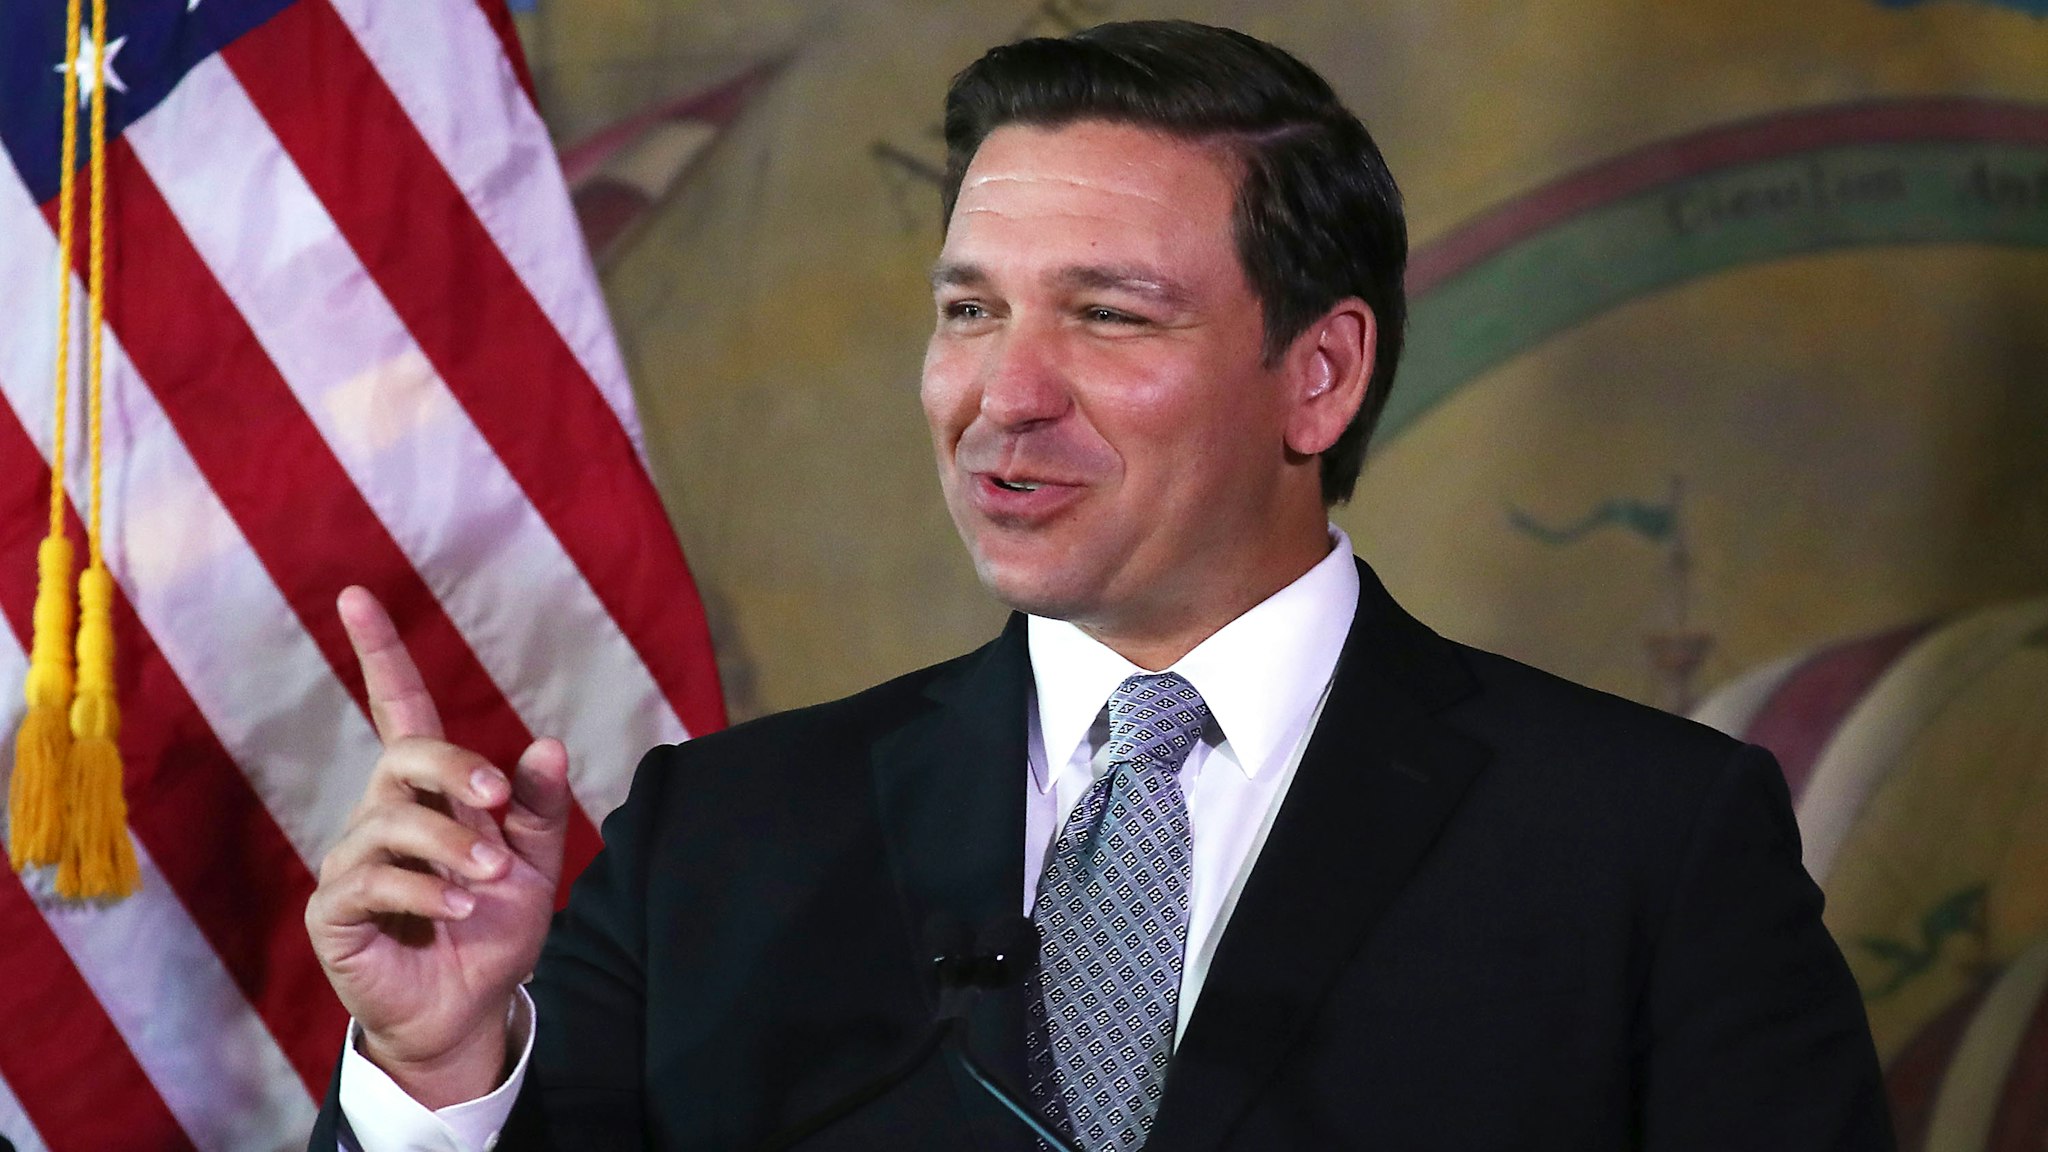 MIAMI, FLORIDA - JANUARY 09: Newly sworn-in Gov. Ron DeSantis attends an event at the Freedom Tower where he named Barbara Lagoa to the Florida Supreme Court on January 09, 2019 in Miami, Florida. Mr. DeSantis was sworn in yesterday as the 46th governor of the state of Florida.